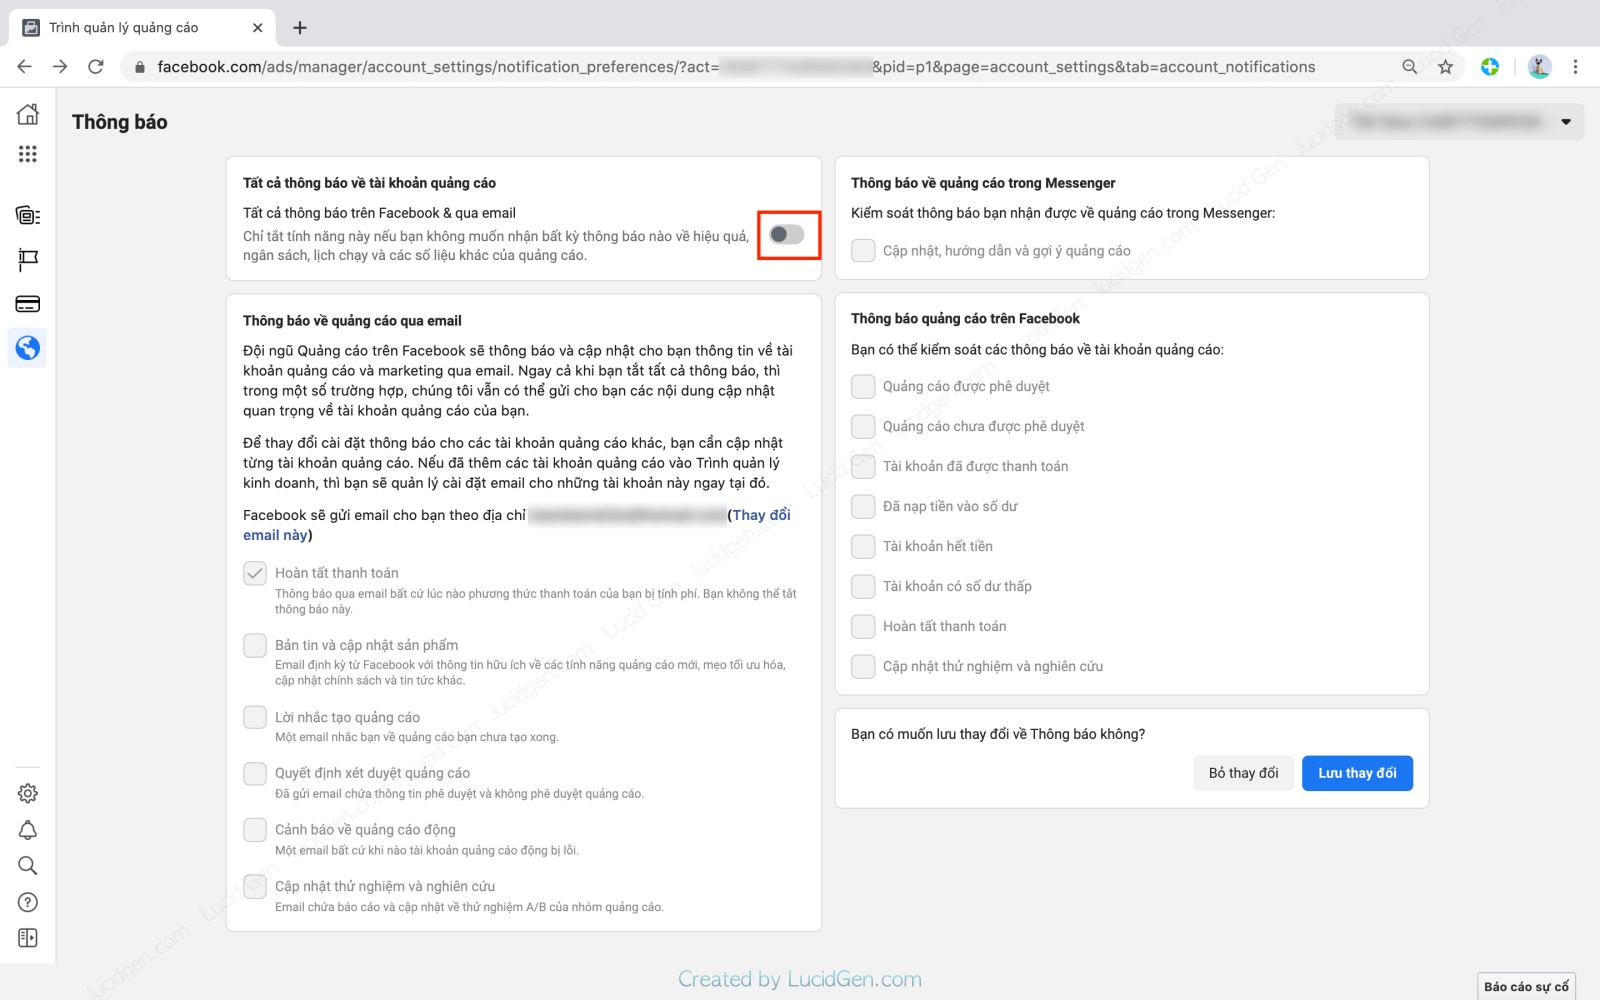 How to turn off Facebook ads notifications - Turn off all Facebook advertising notifications with a single button